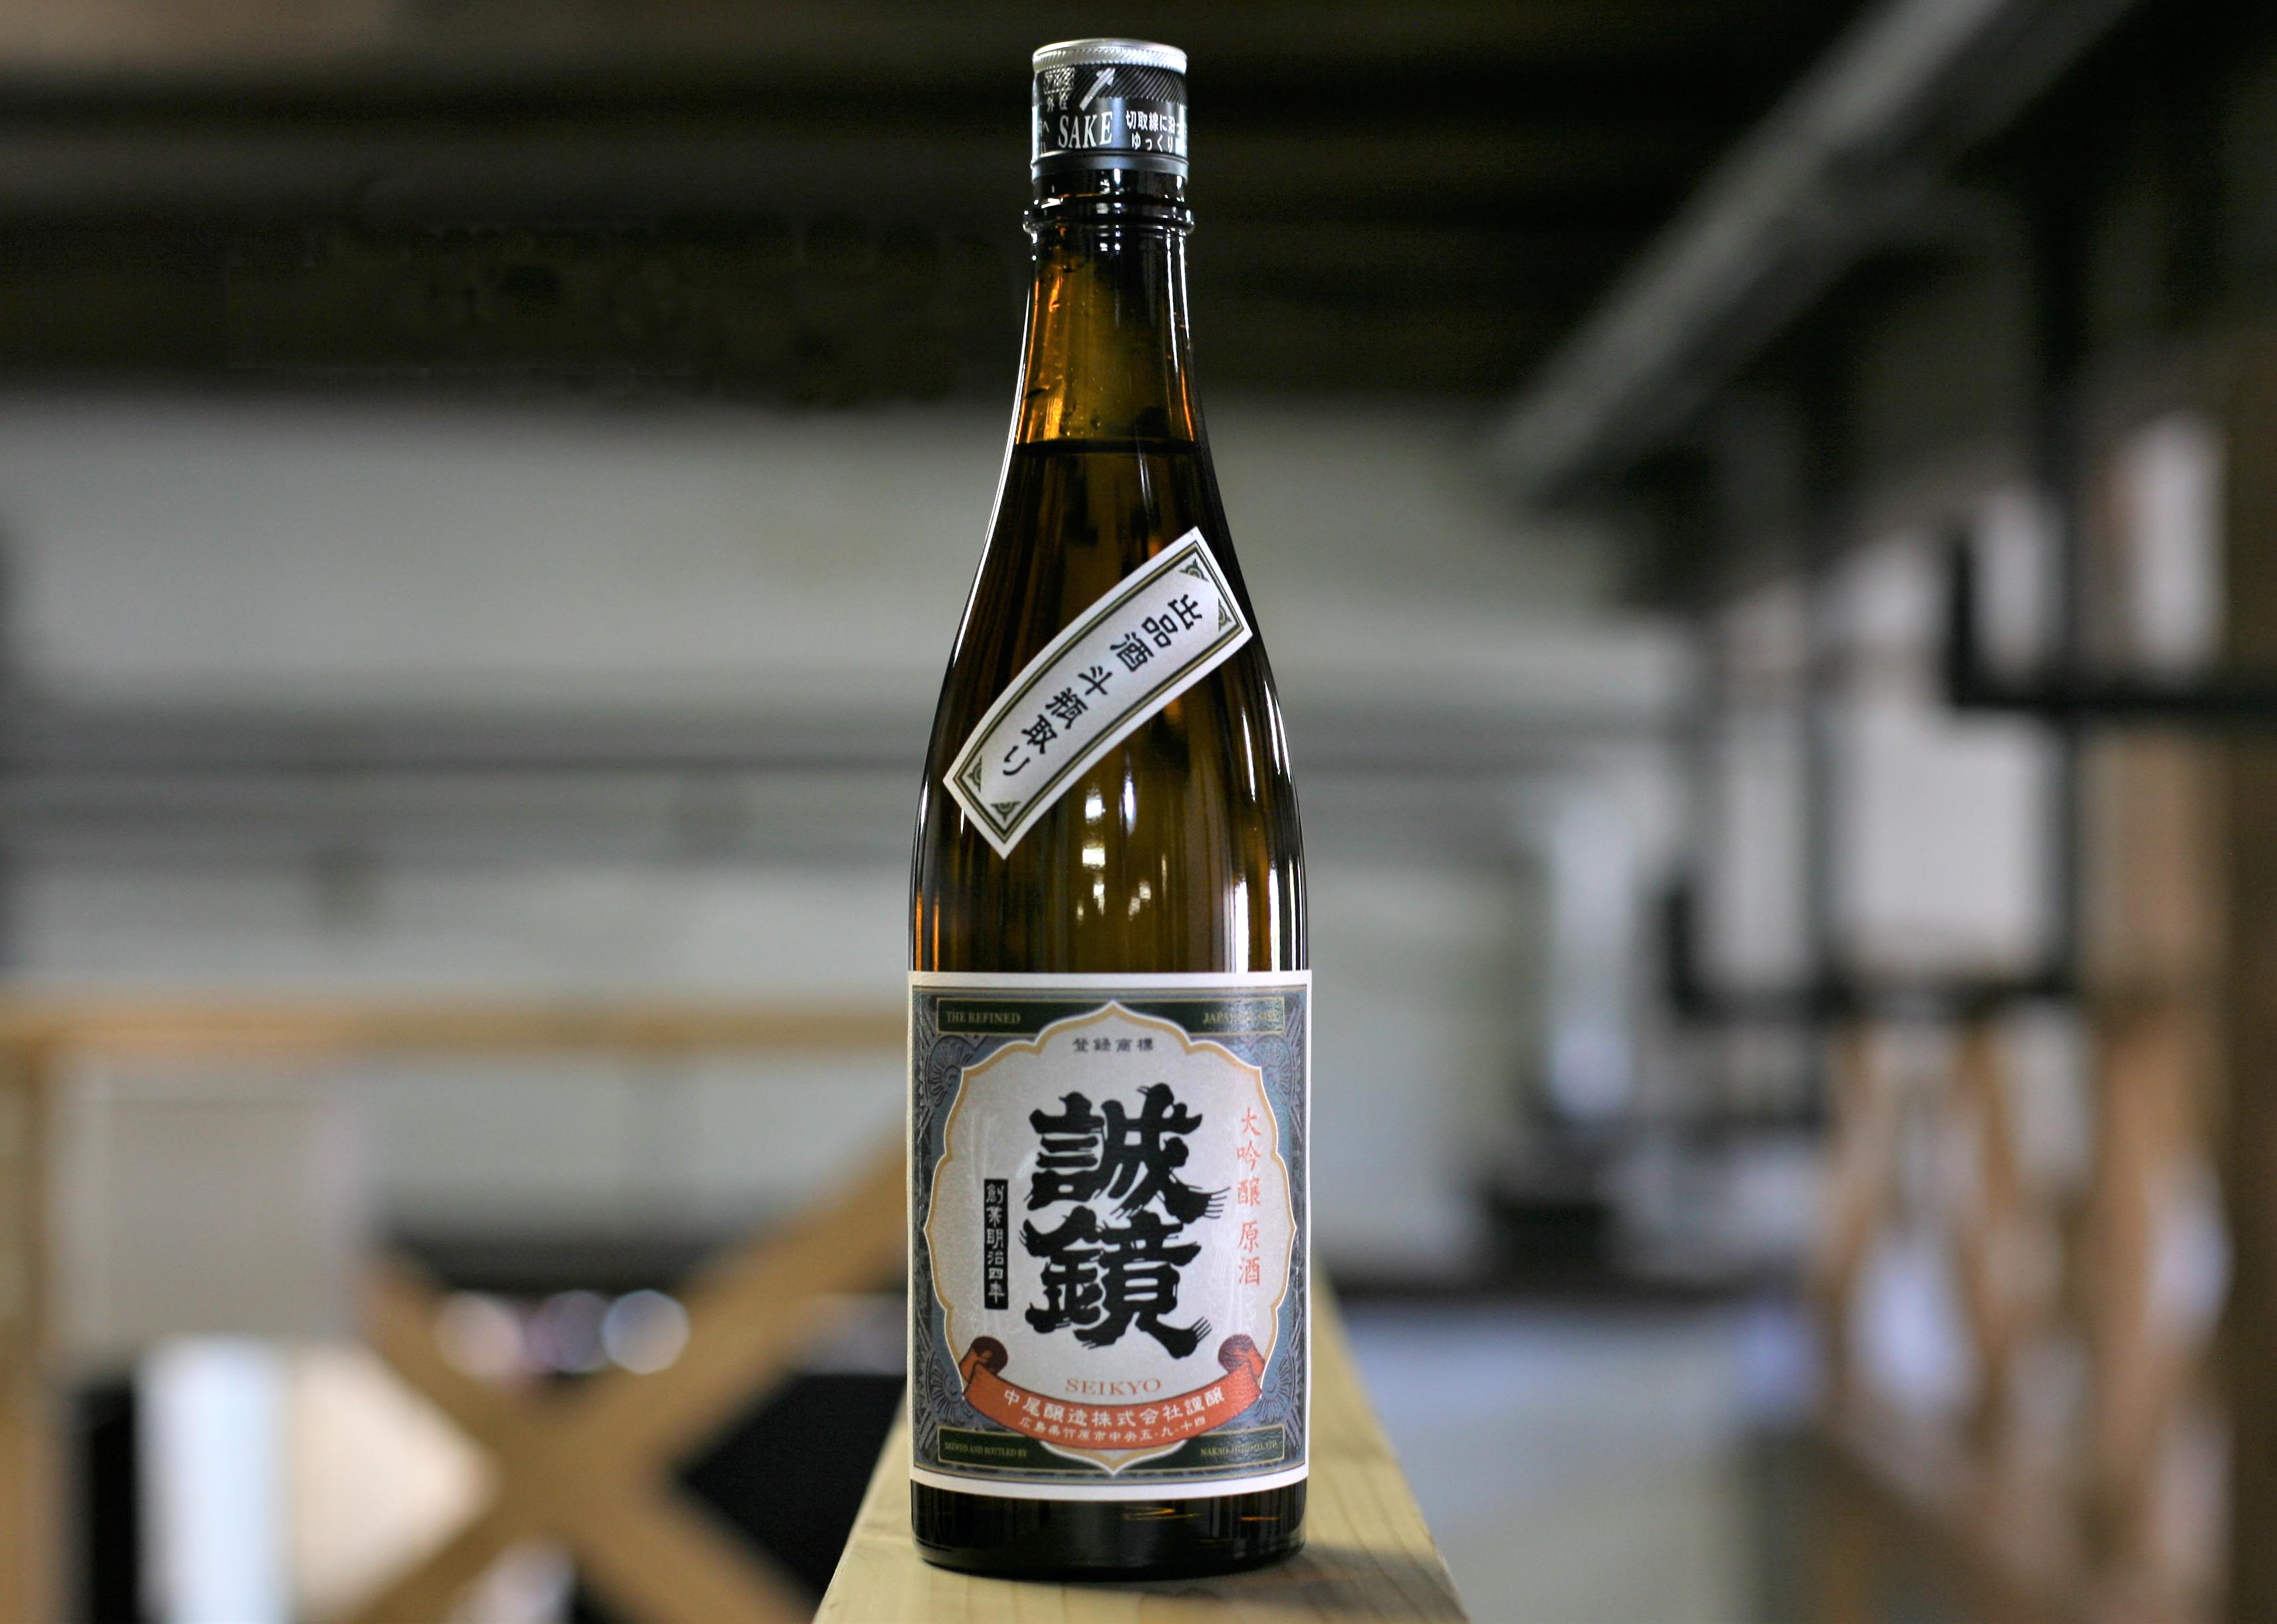 300 bottles of Gold Prize Winning Sake are now available for limited time only!